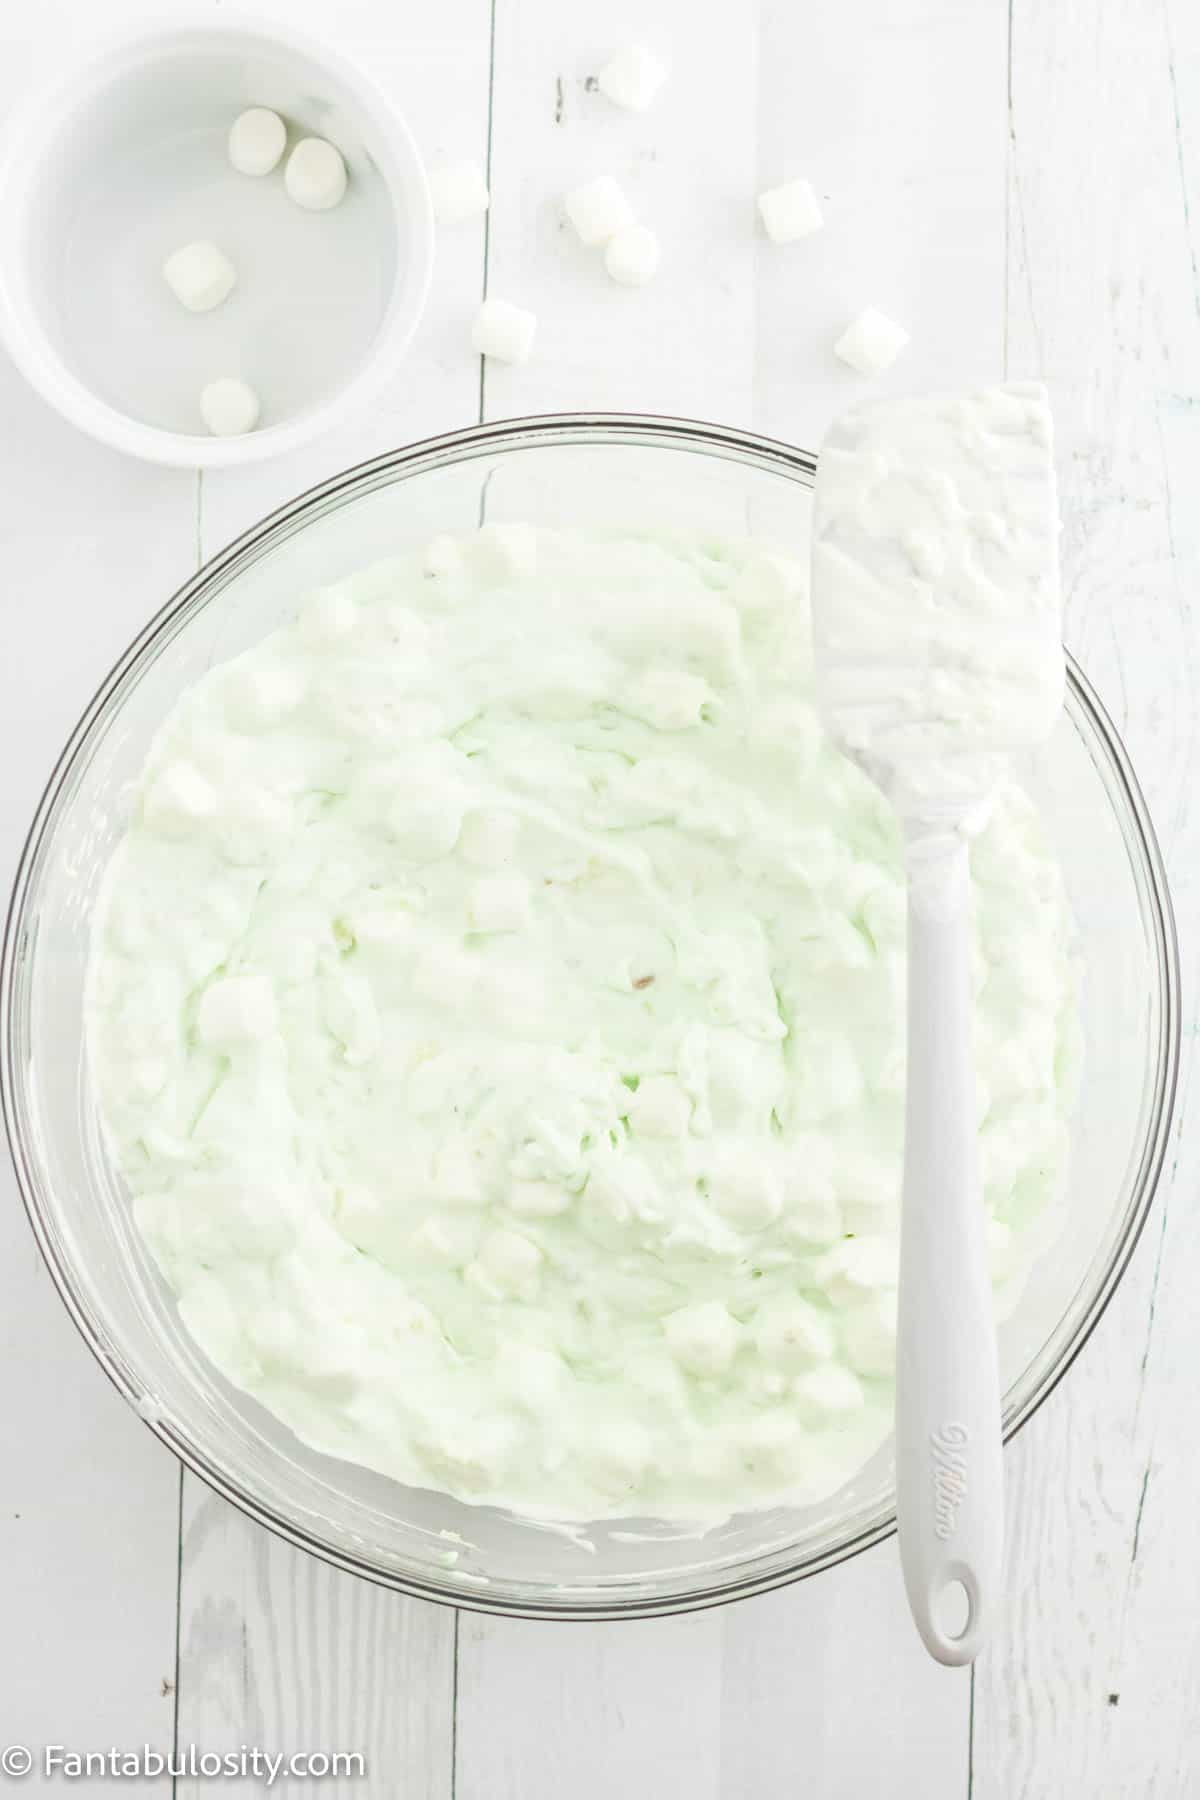 whipped topping added to mixture in glass bowl